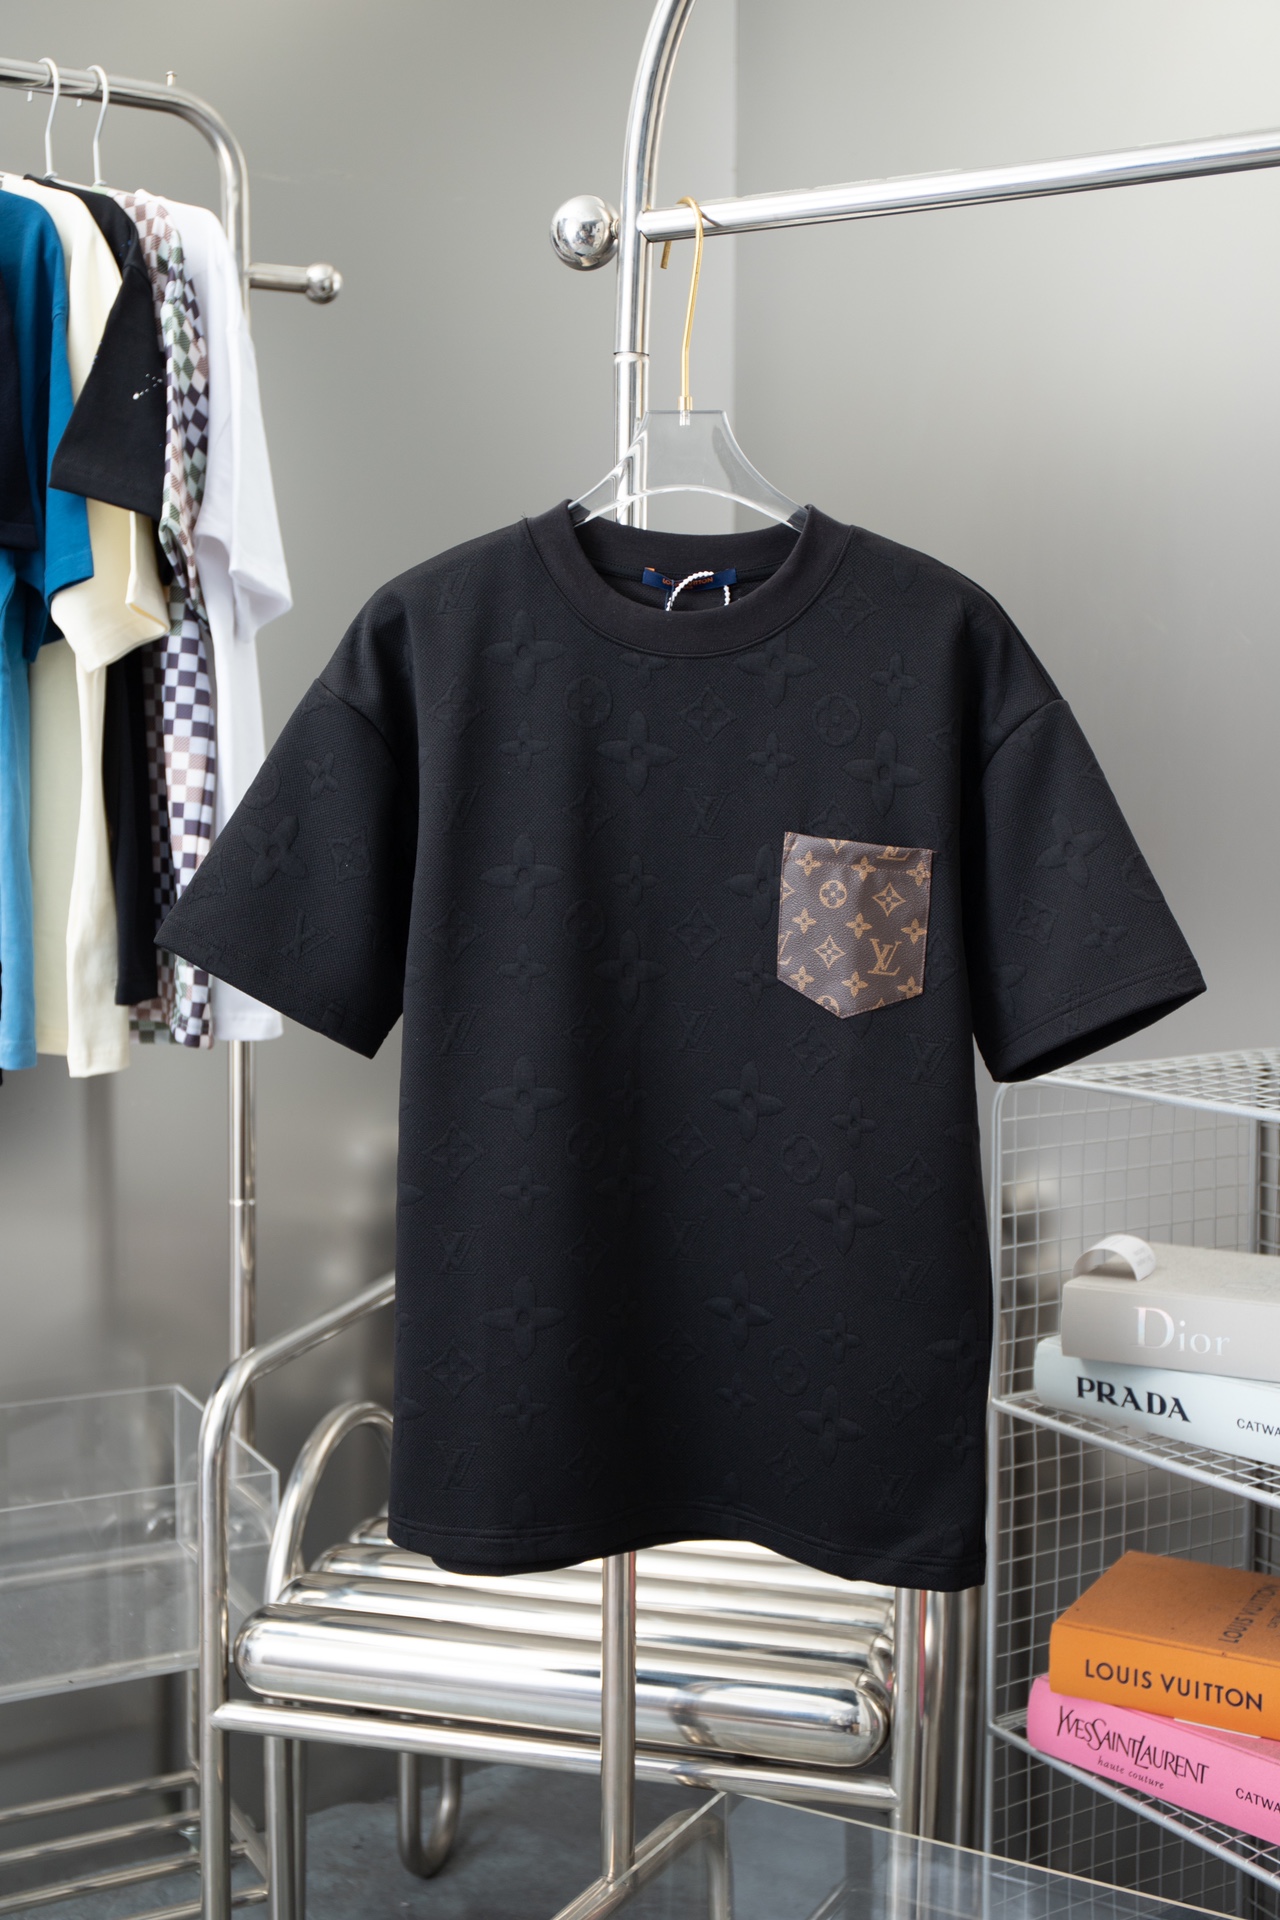 Louis Vuitton Luxury
 Clothing T-Shirt Unisex Cotton Spring/Summer Collection Fashion Short Sleeve